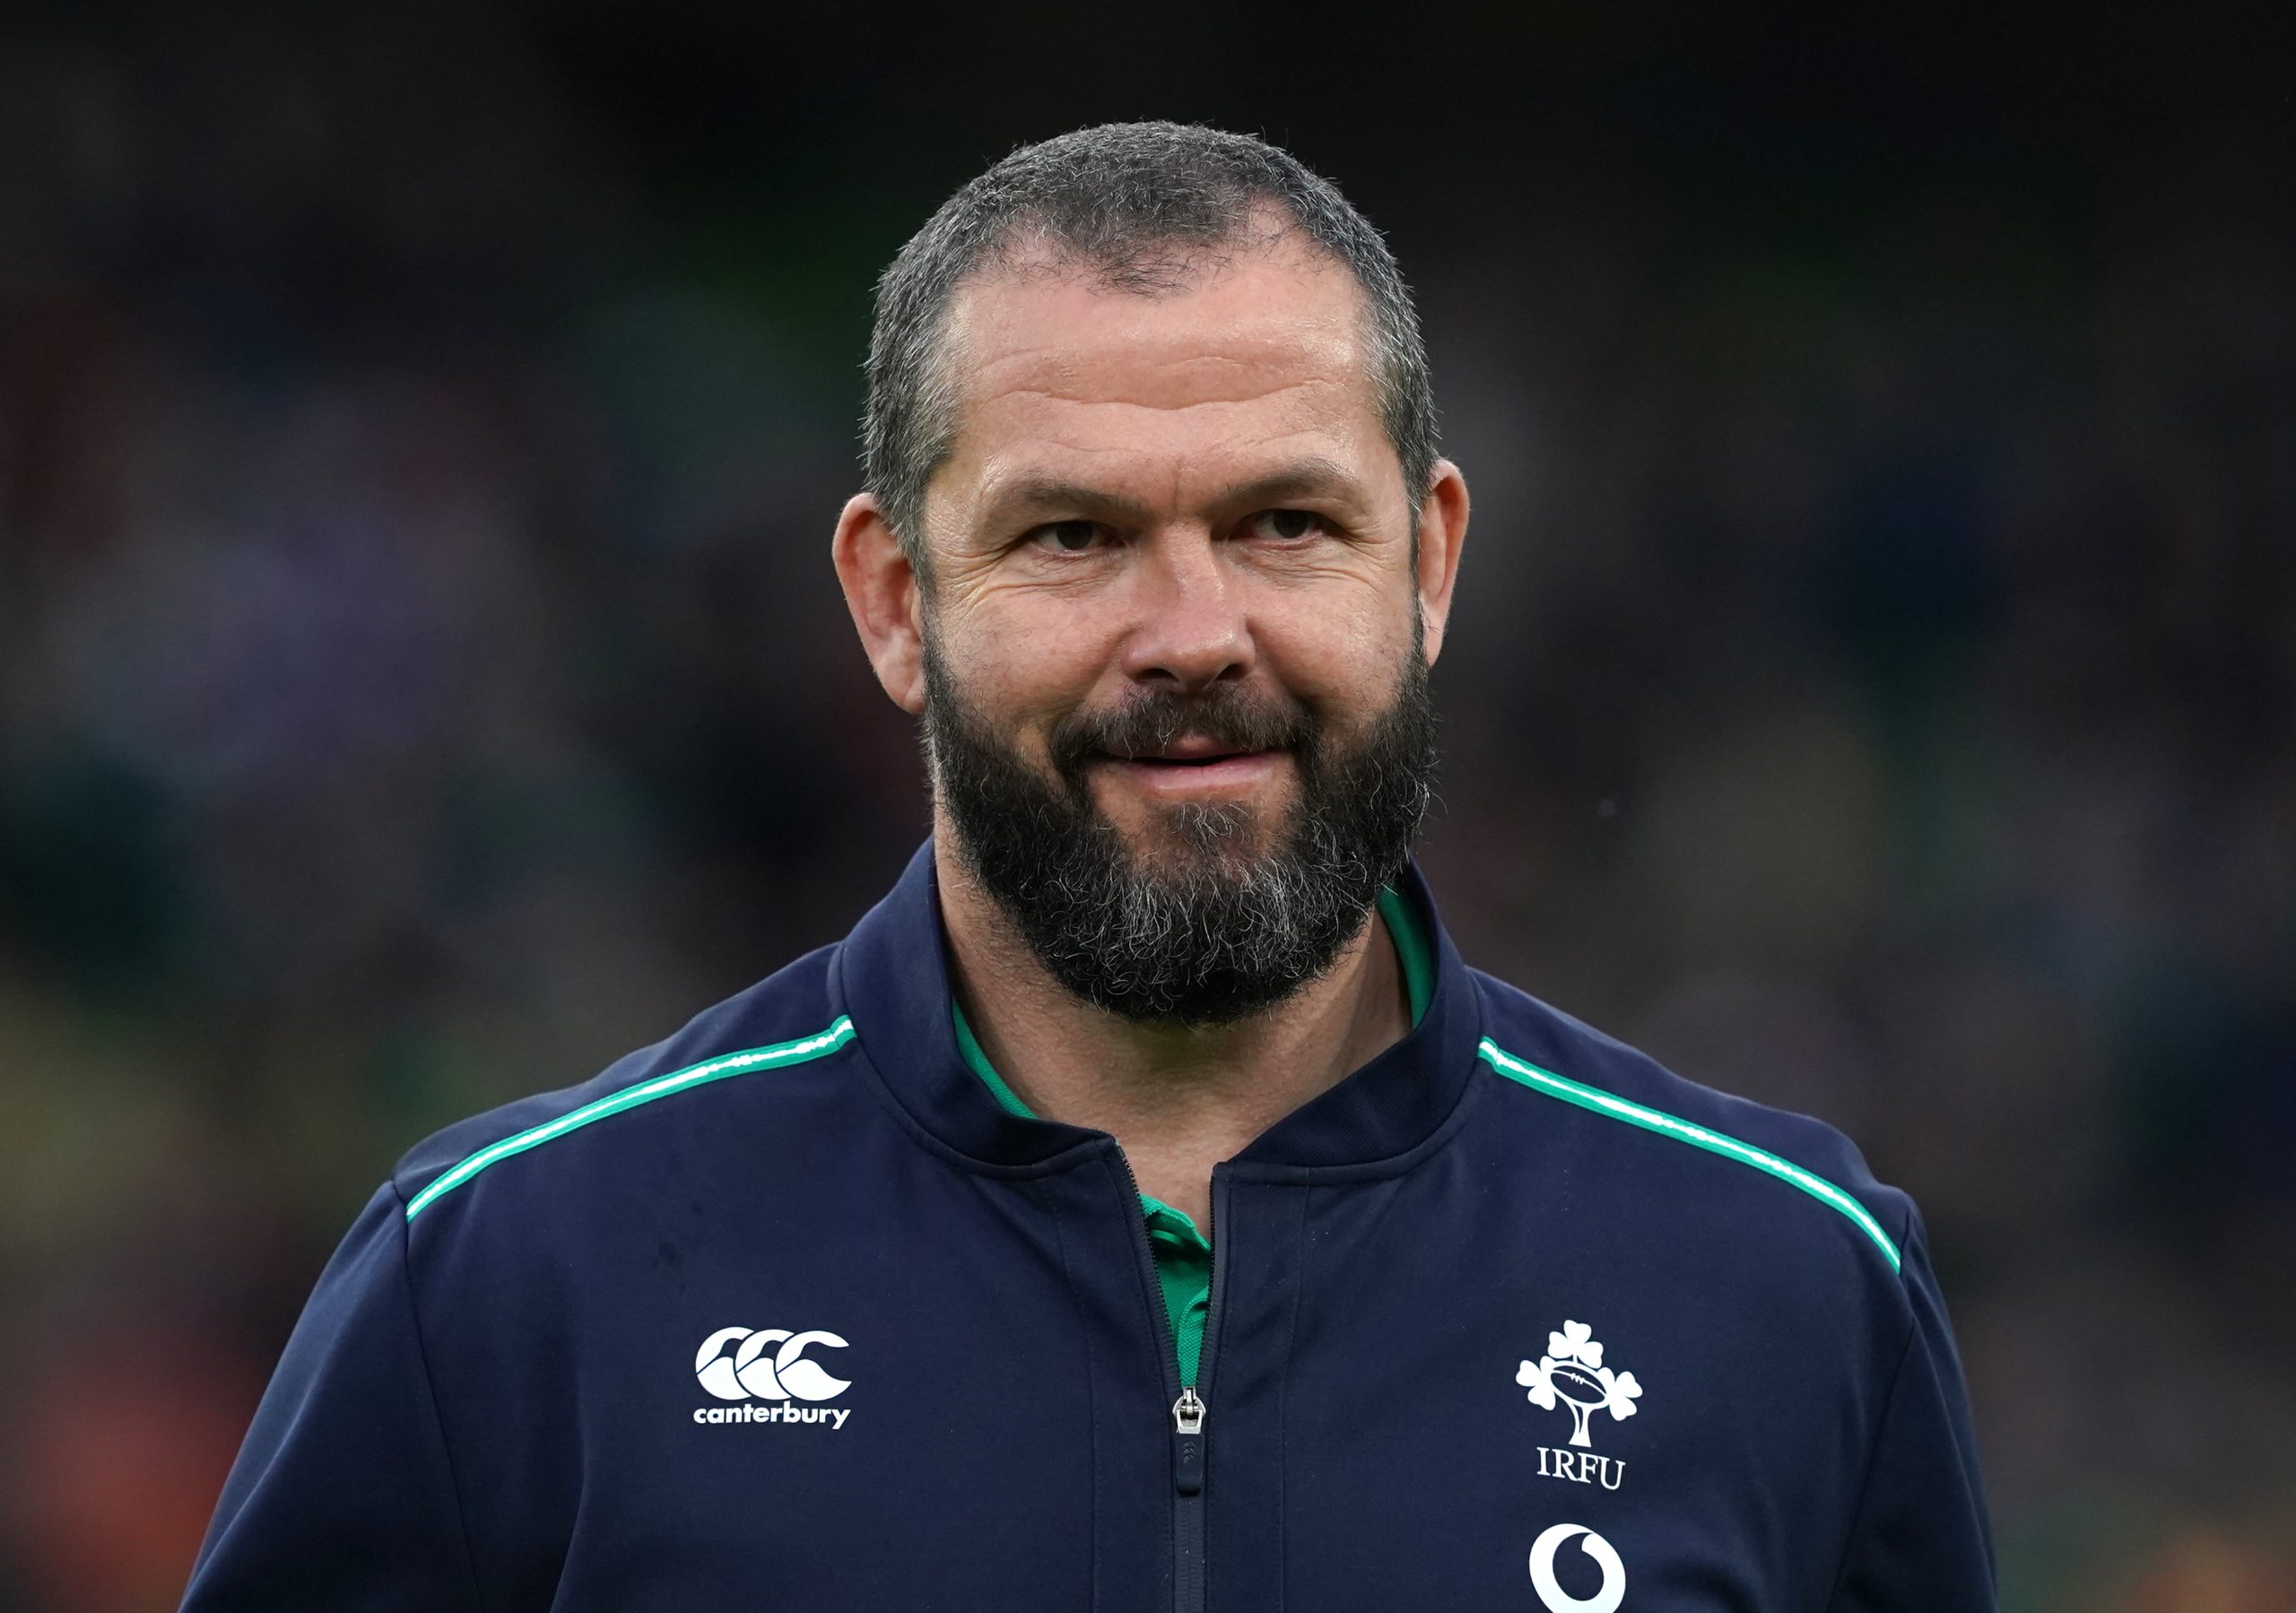 Andy Farrell pleased with Ireland’s preparations ahead of crunch Scotland clash